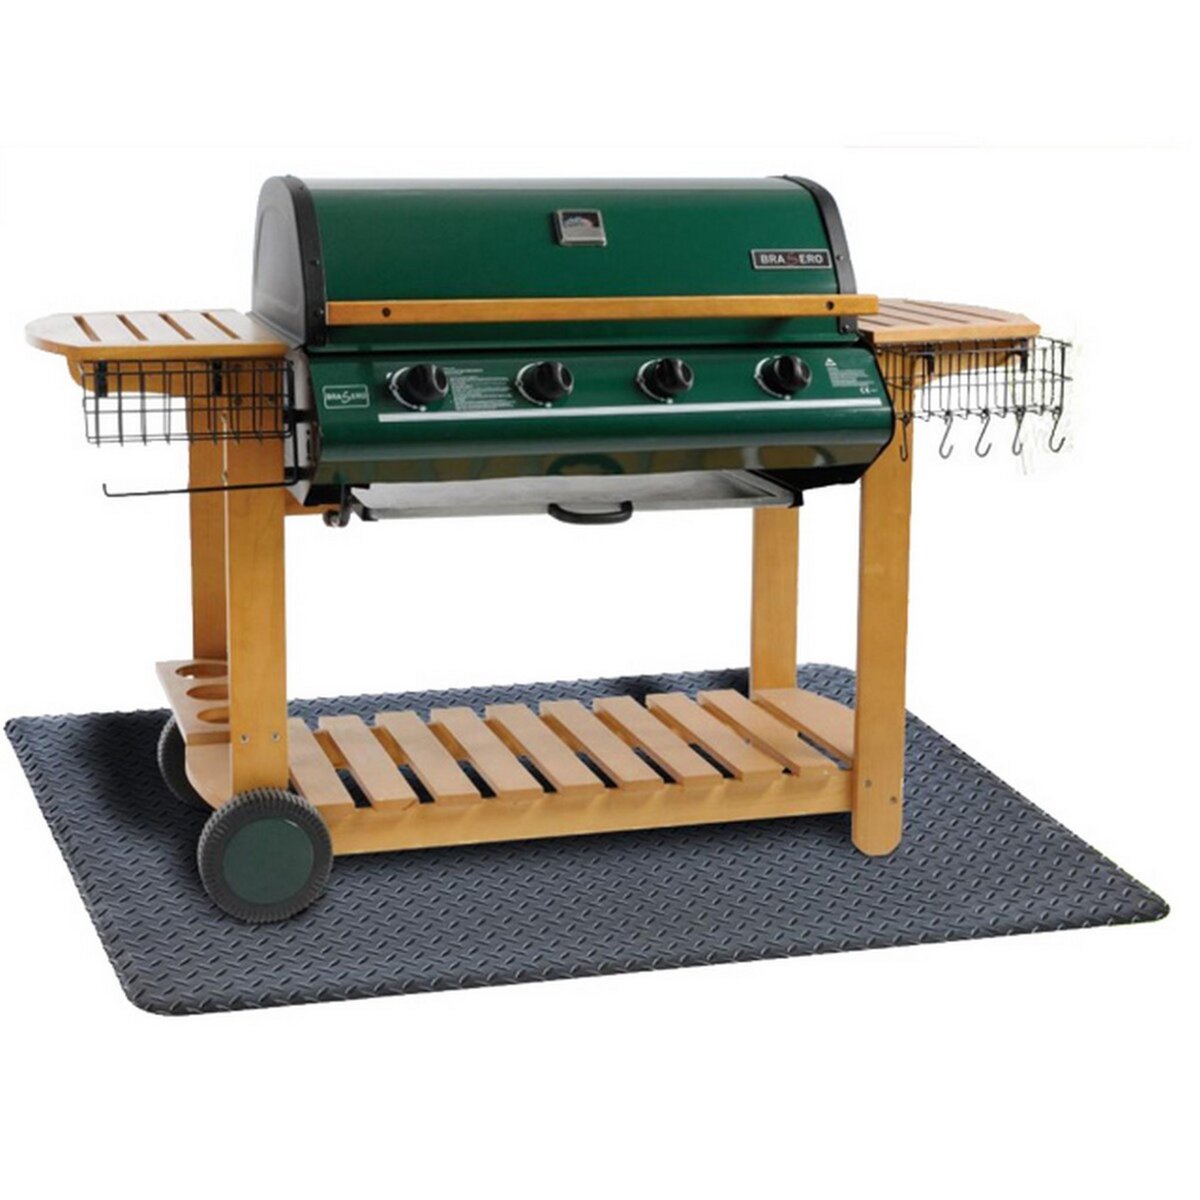 FAVEX Tapis protection pour Barbecue